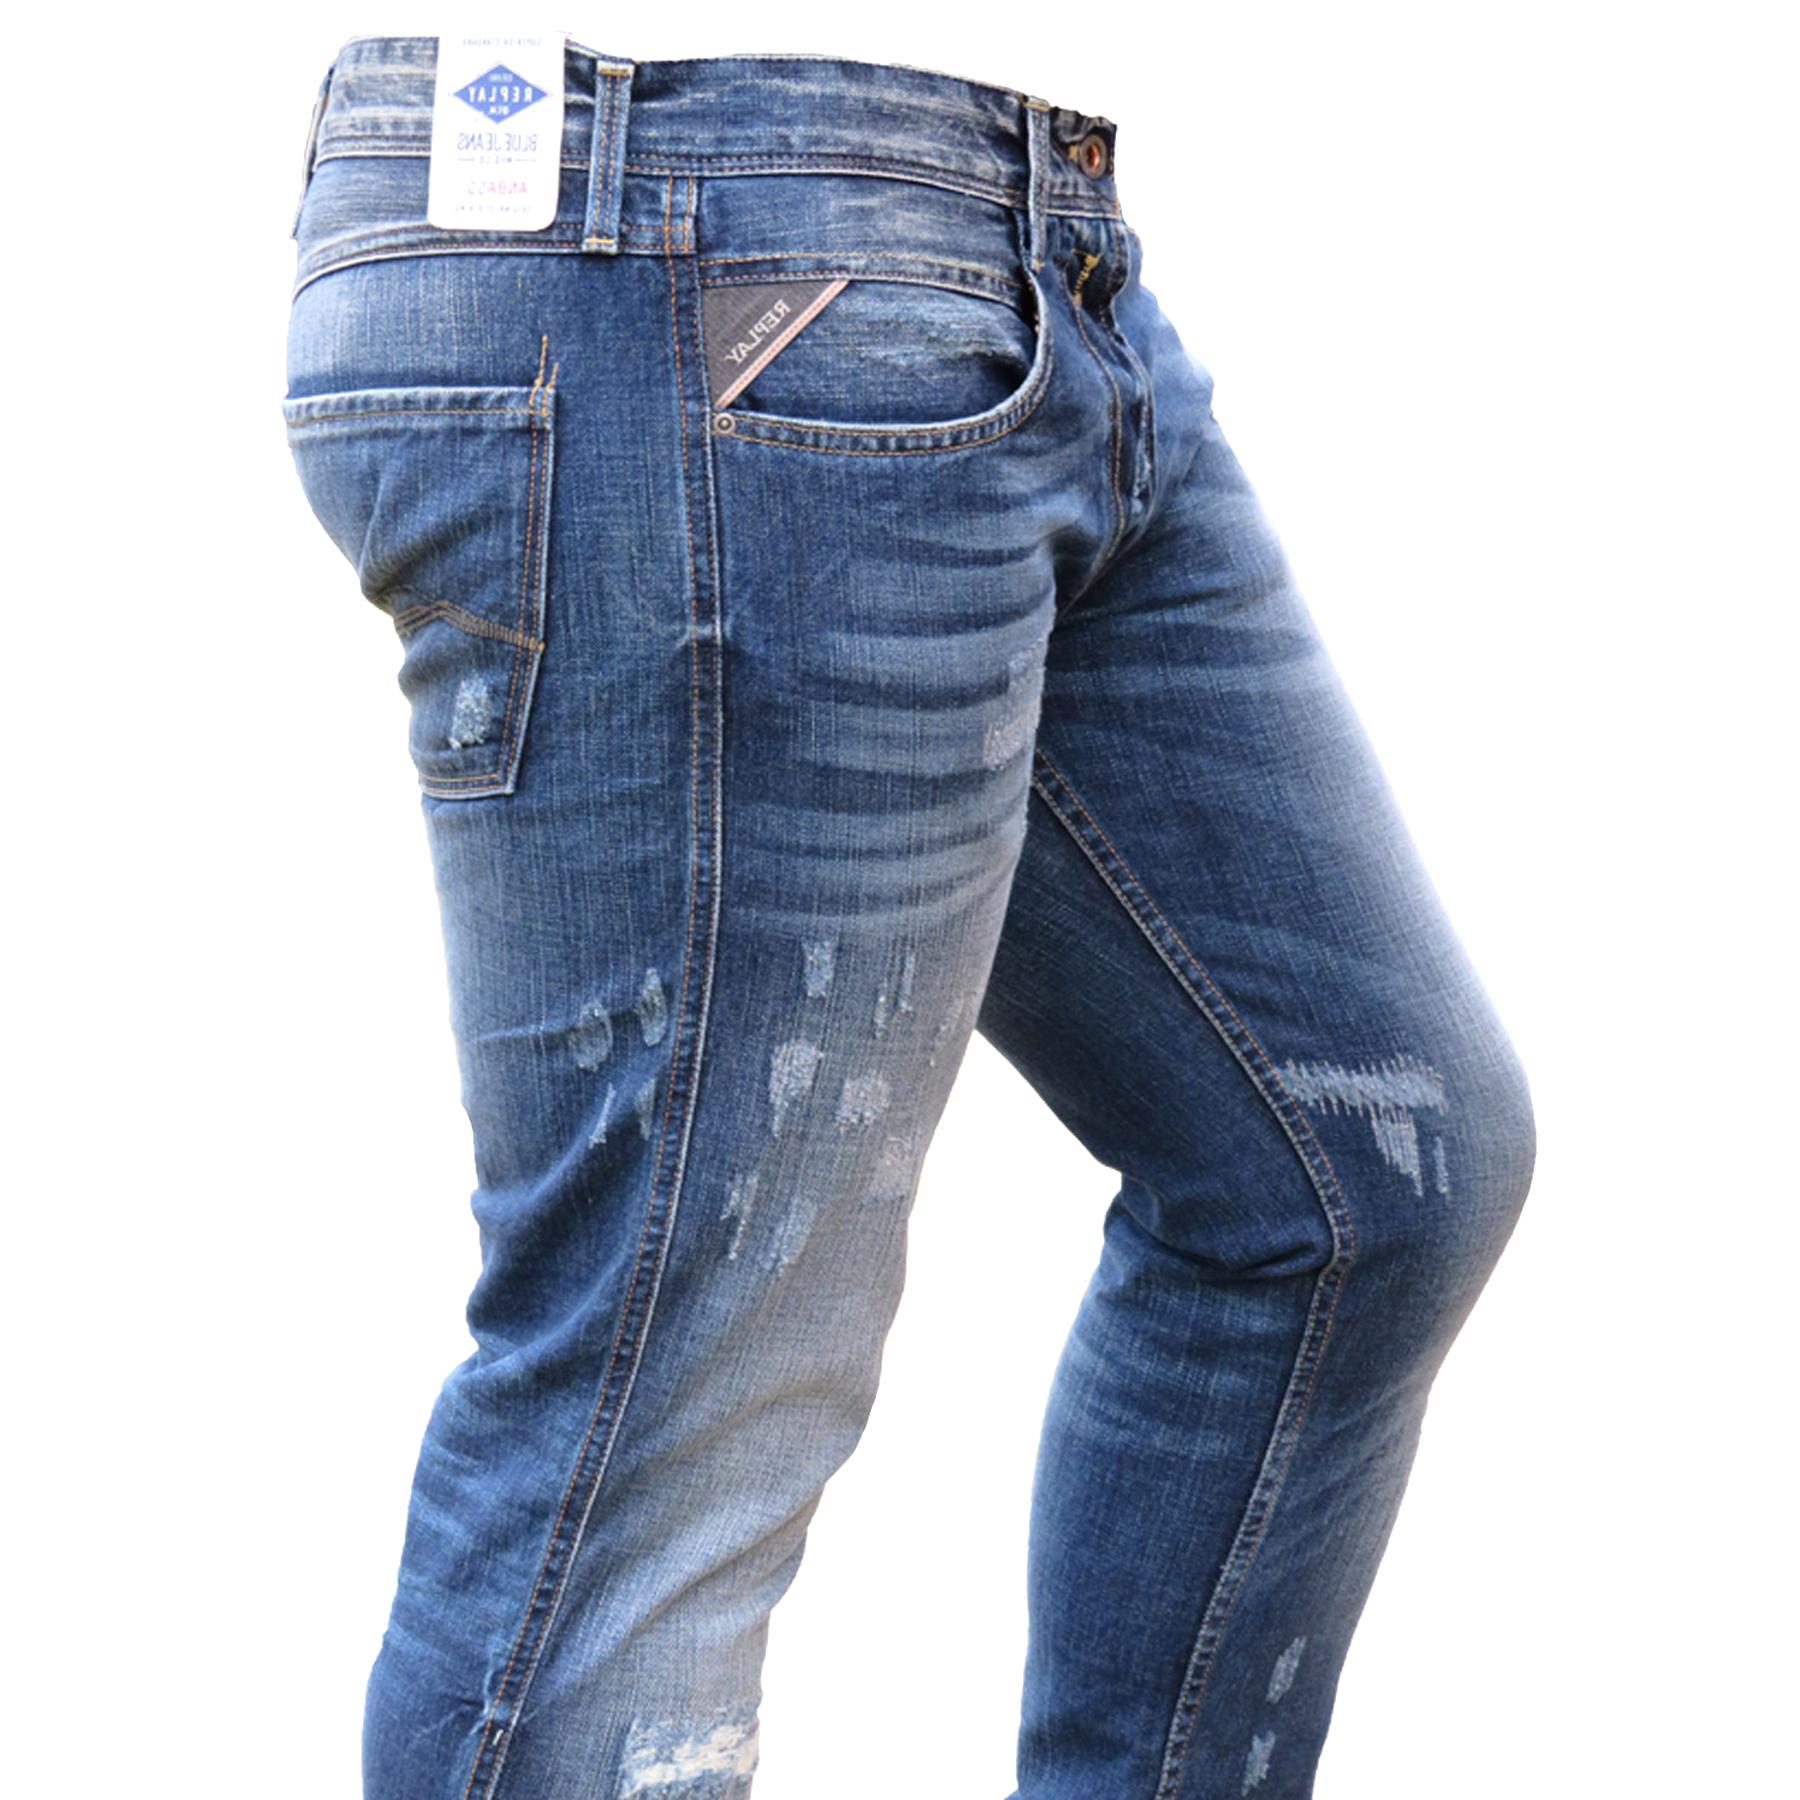 Men Replay Jeans for sale in UK | 60 used Men Replay Jeans